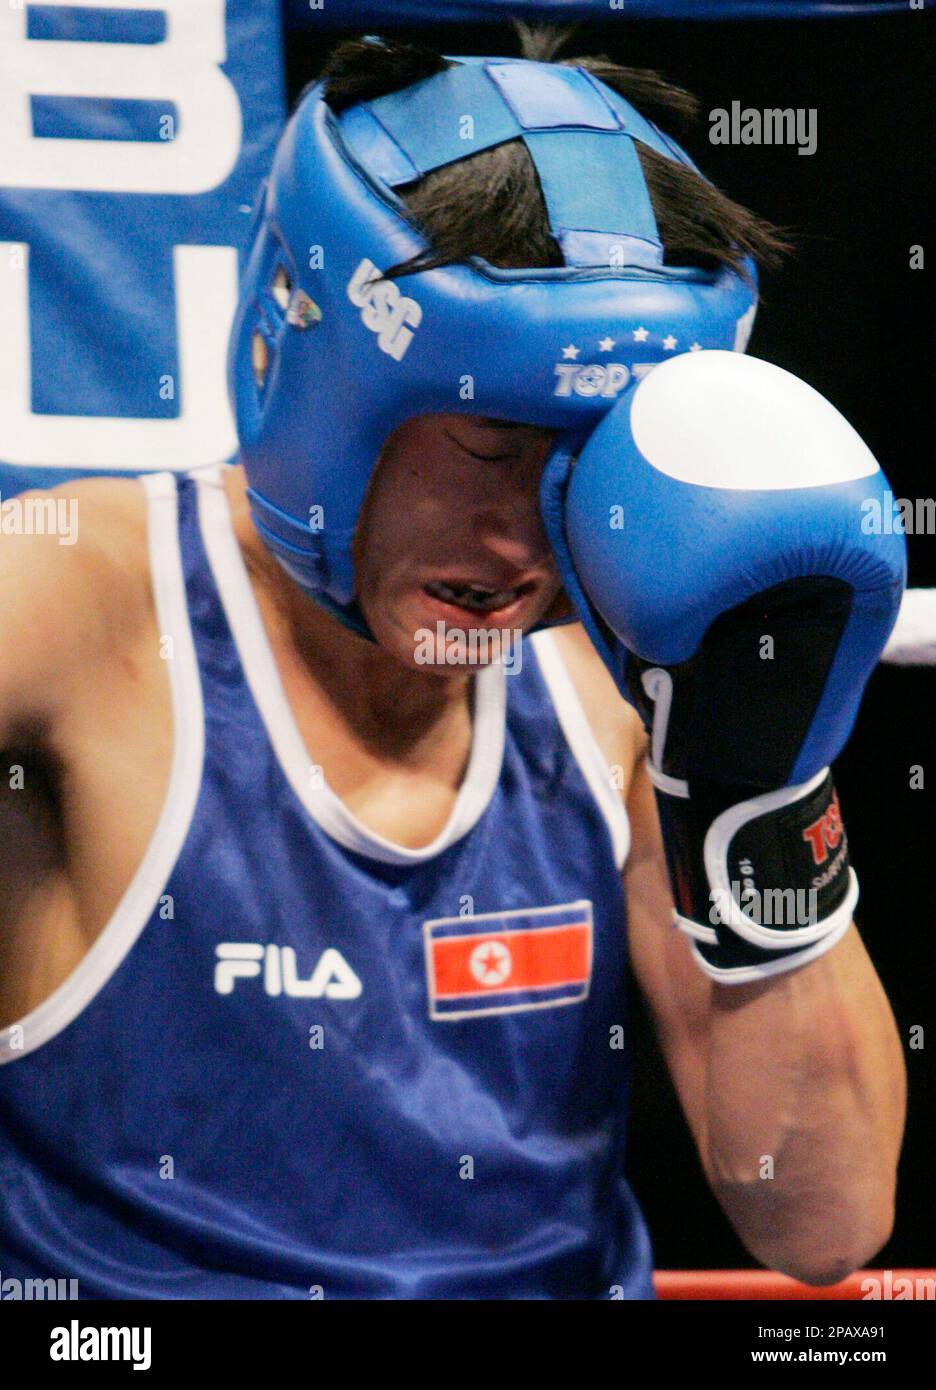 Song Guk Kim of North Korea, reacts as he listens to his coach in the Lightweight 60 kg during the semifinals of the World Boxing Championships against Domenico Valentino of Italy, in